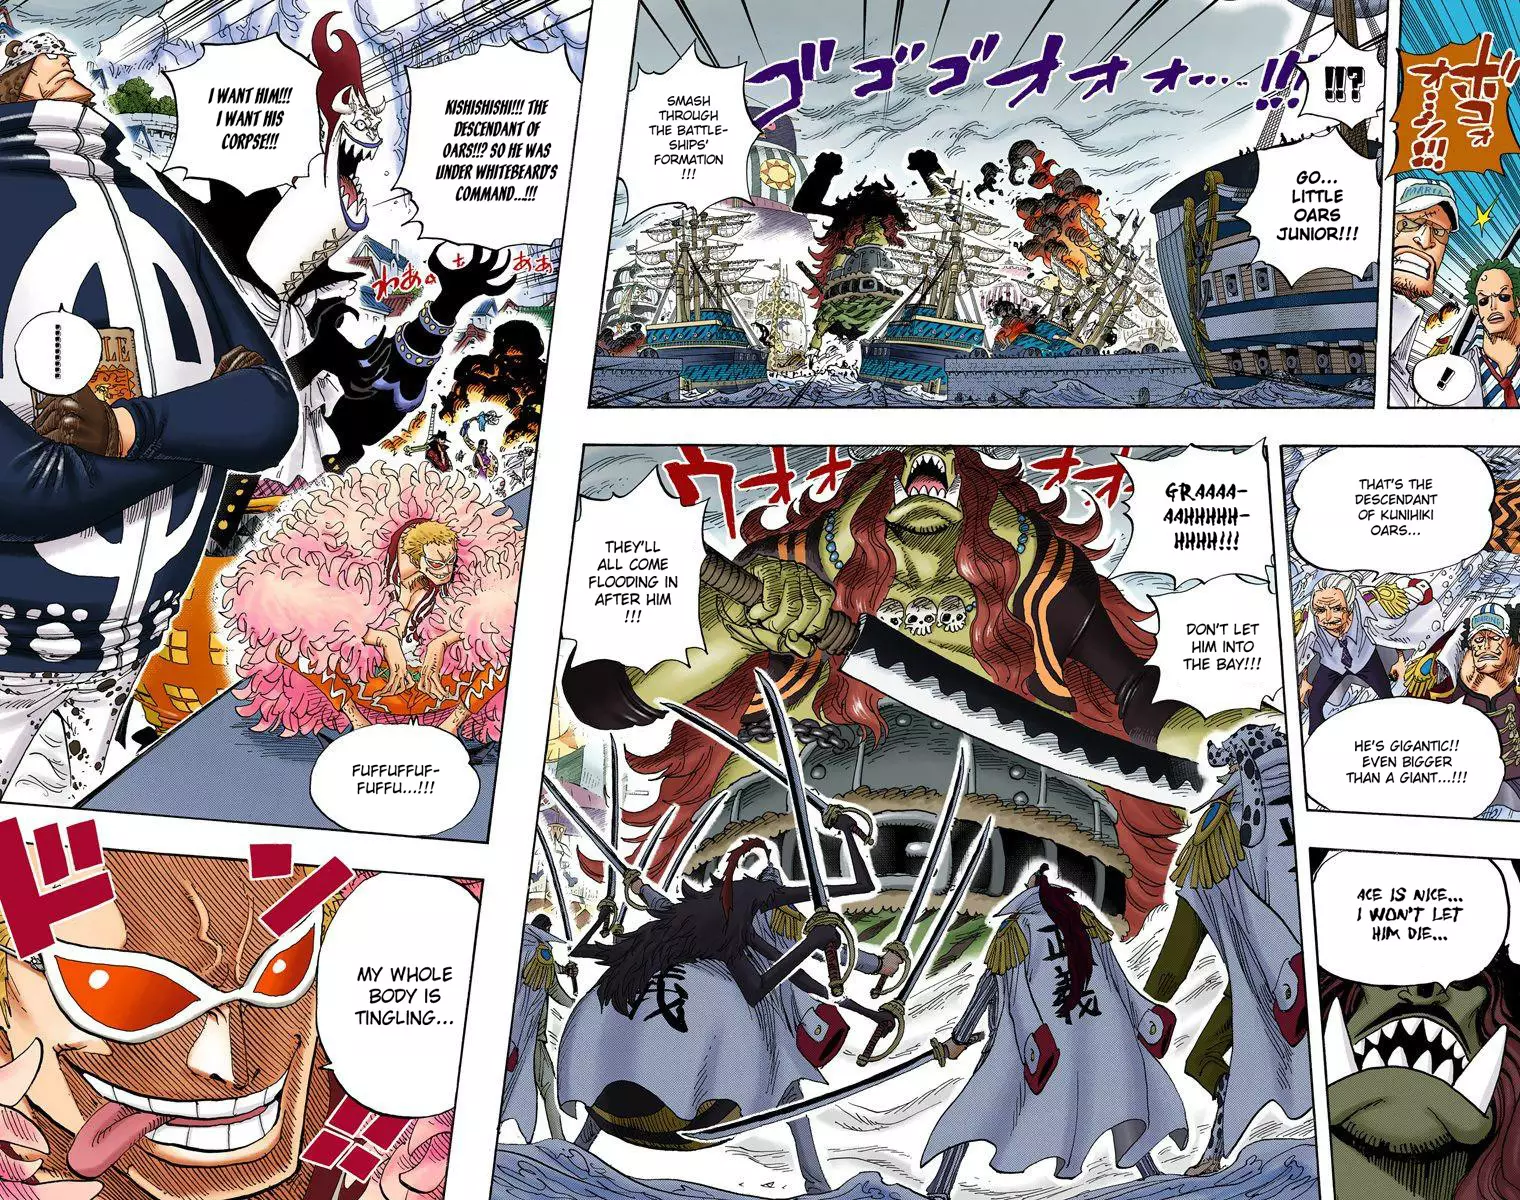 One Piece - Digital Colored Comics - 554 page 9-8403bbd0